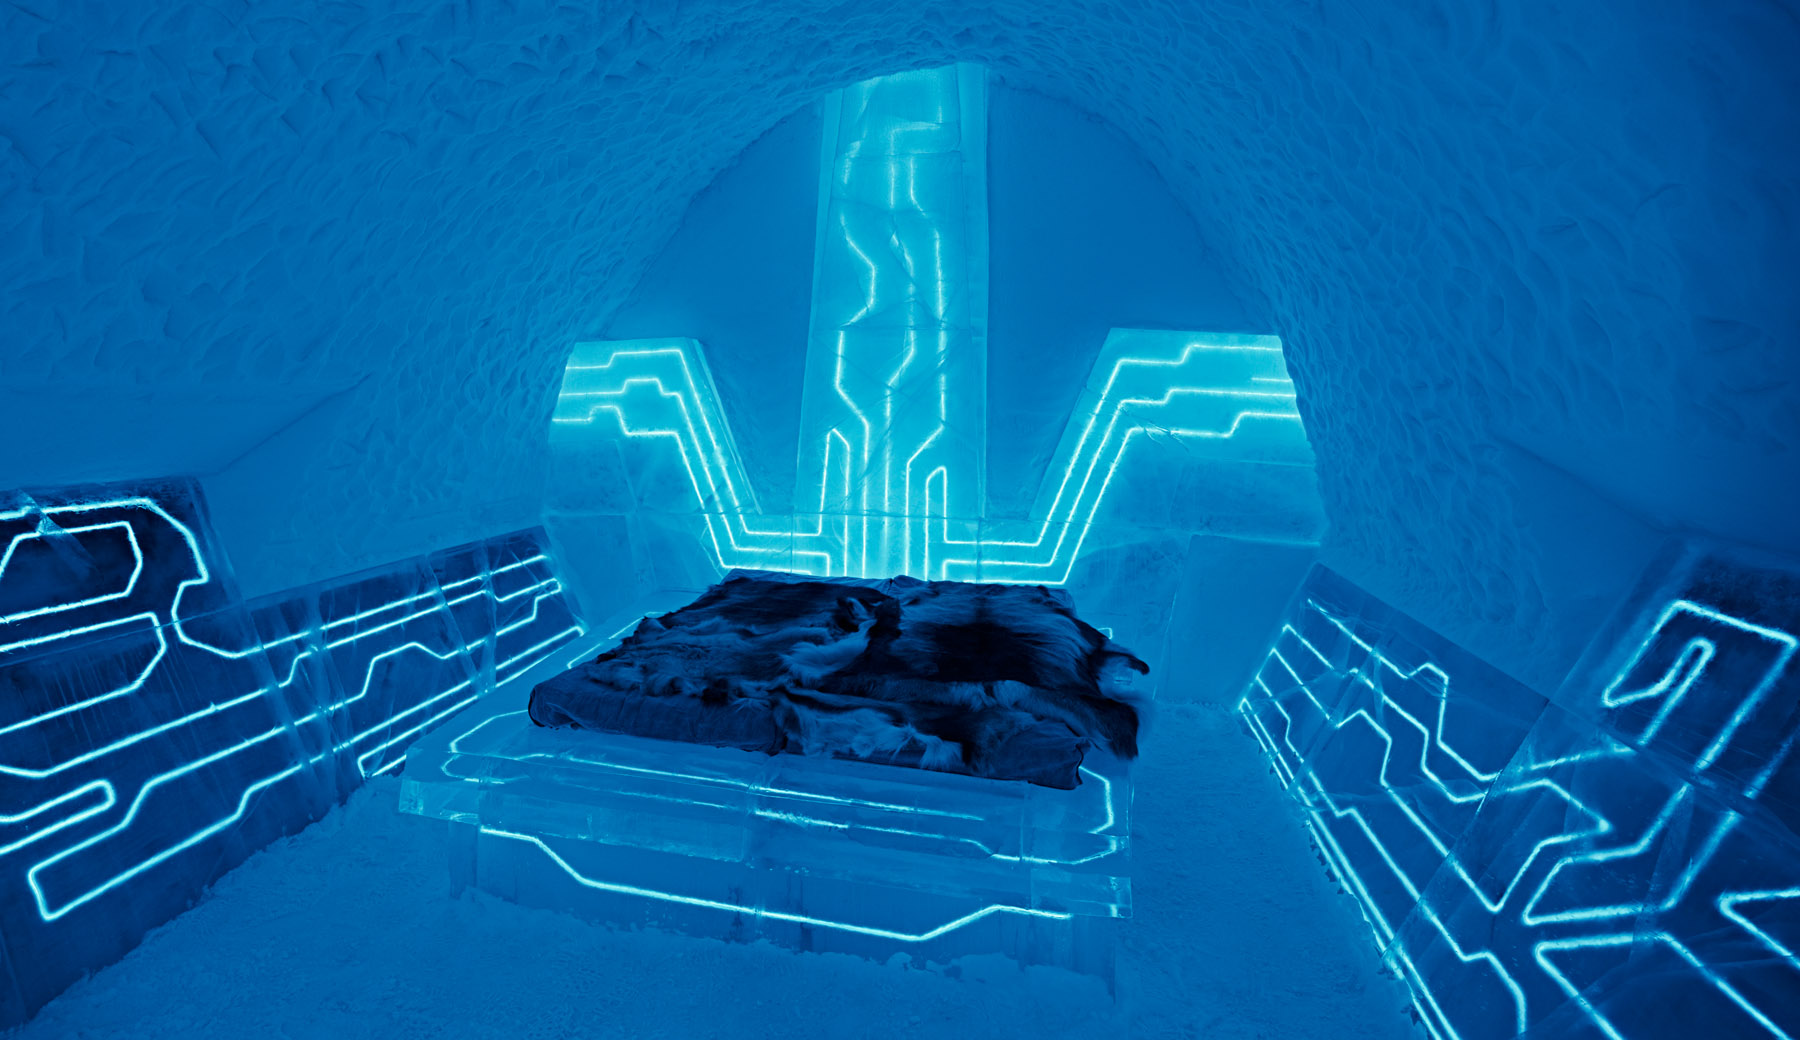 IceHotel-09